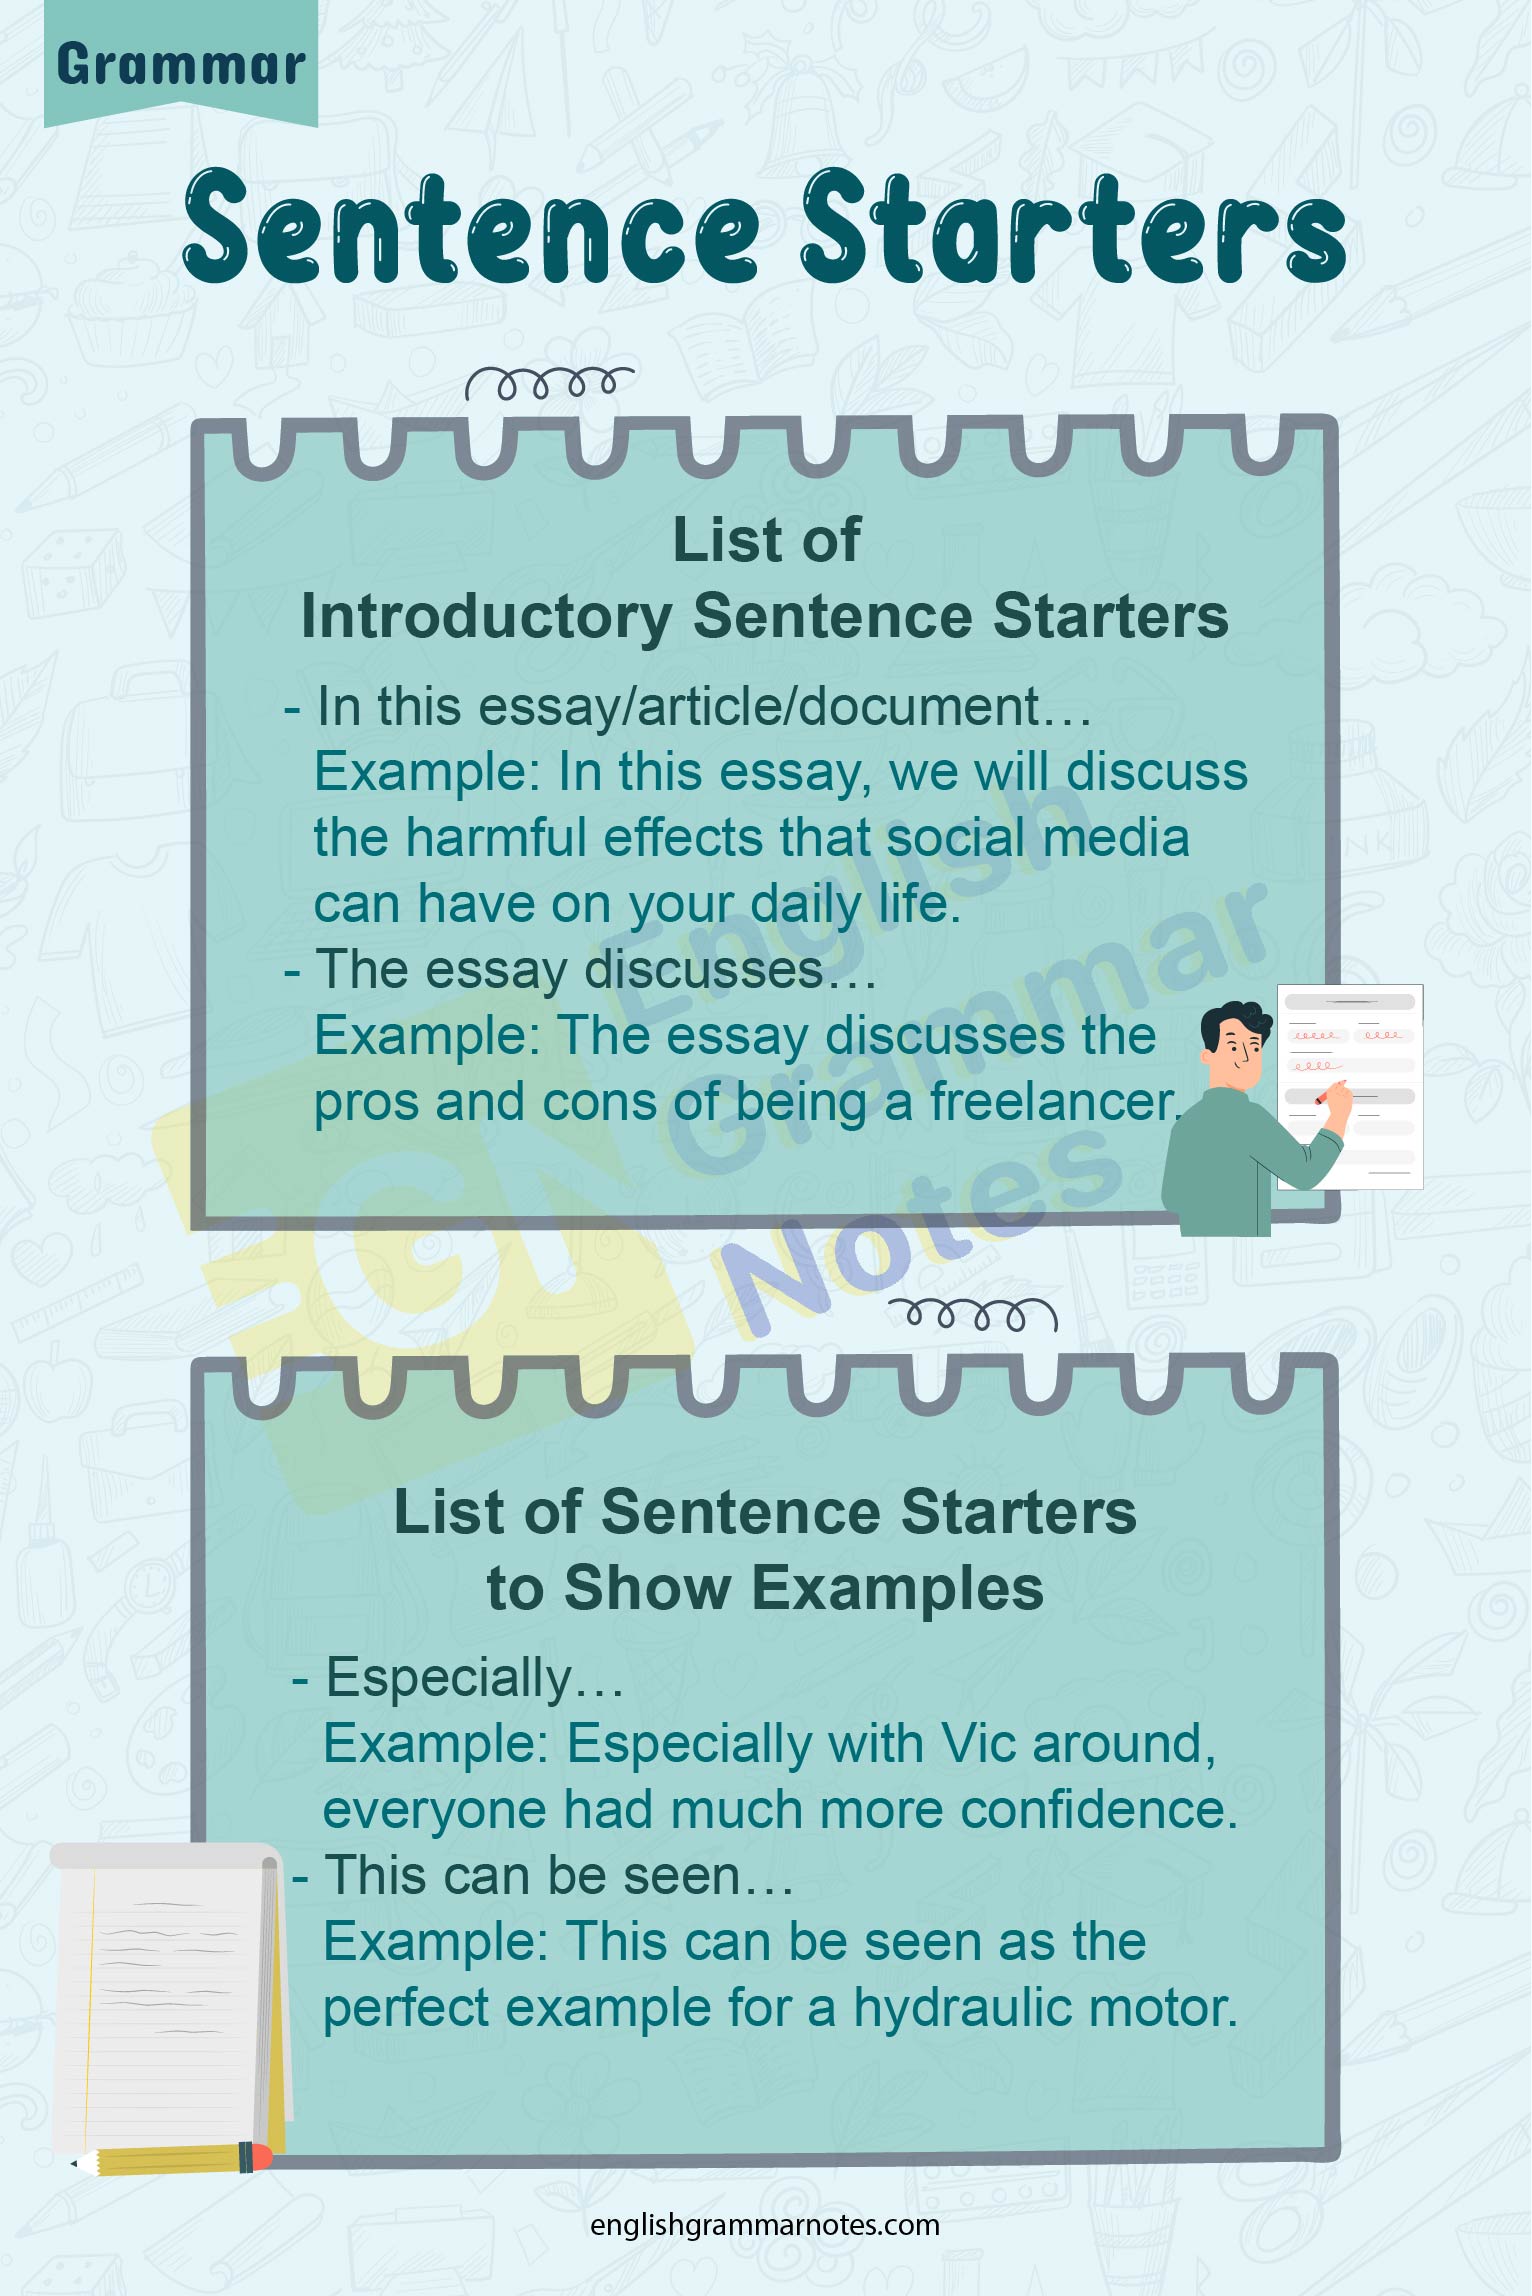 Sentence Starters Uses List Of Sentence Starters To Emphasis To 